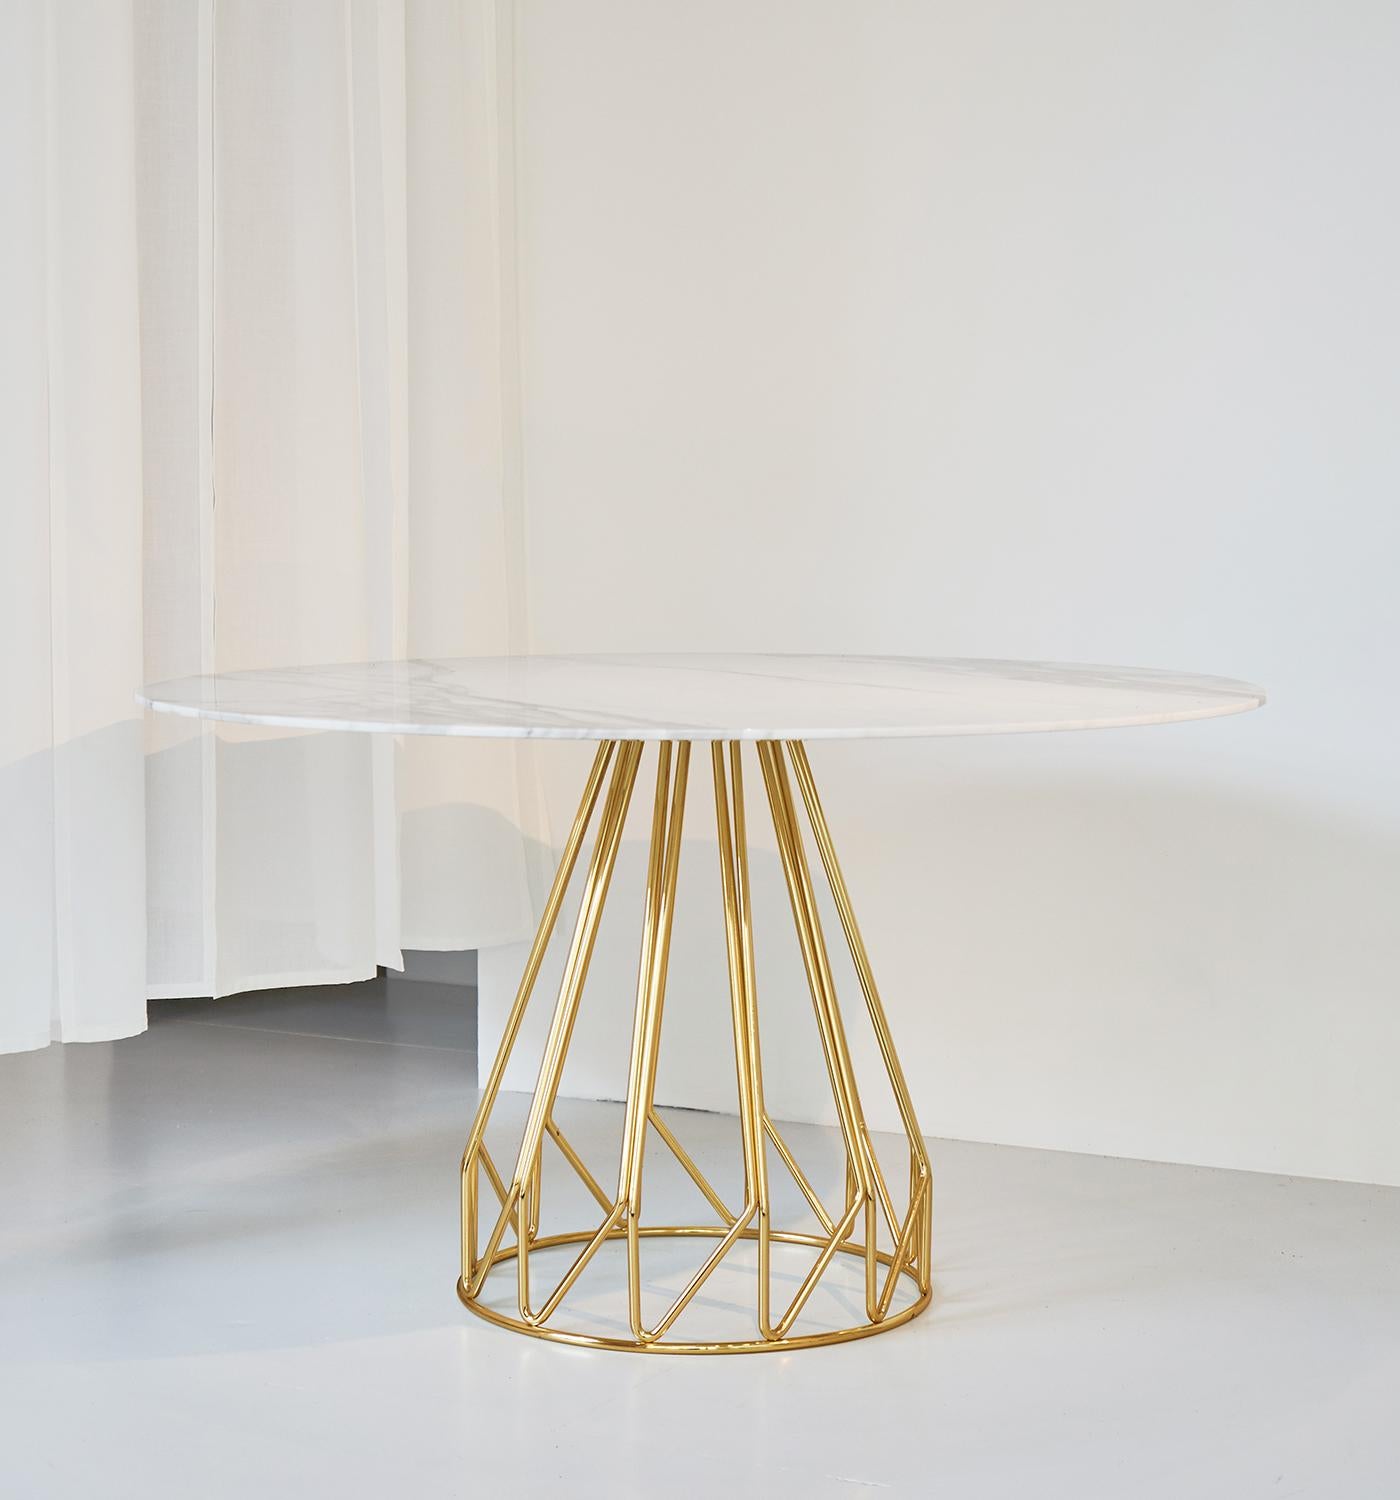 An harmonic sequence of metal wires folded in here, each element is part of a large, light and structured whole whit real Port Laurent Marble top diameter of 1300
Madama table is available with many different marble and glass top.
Madama table,